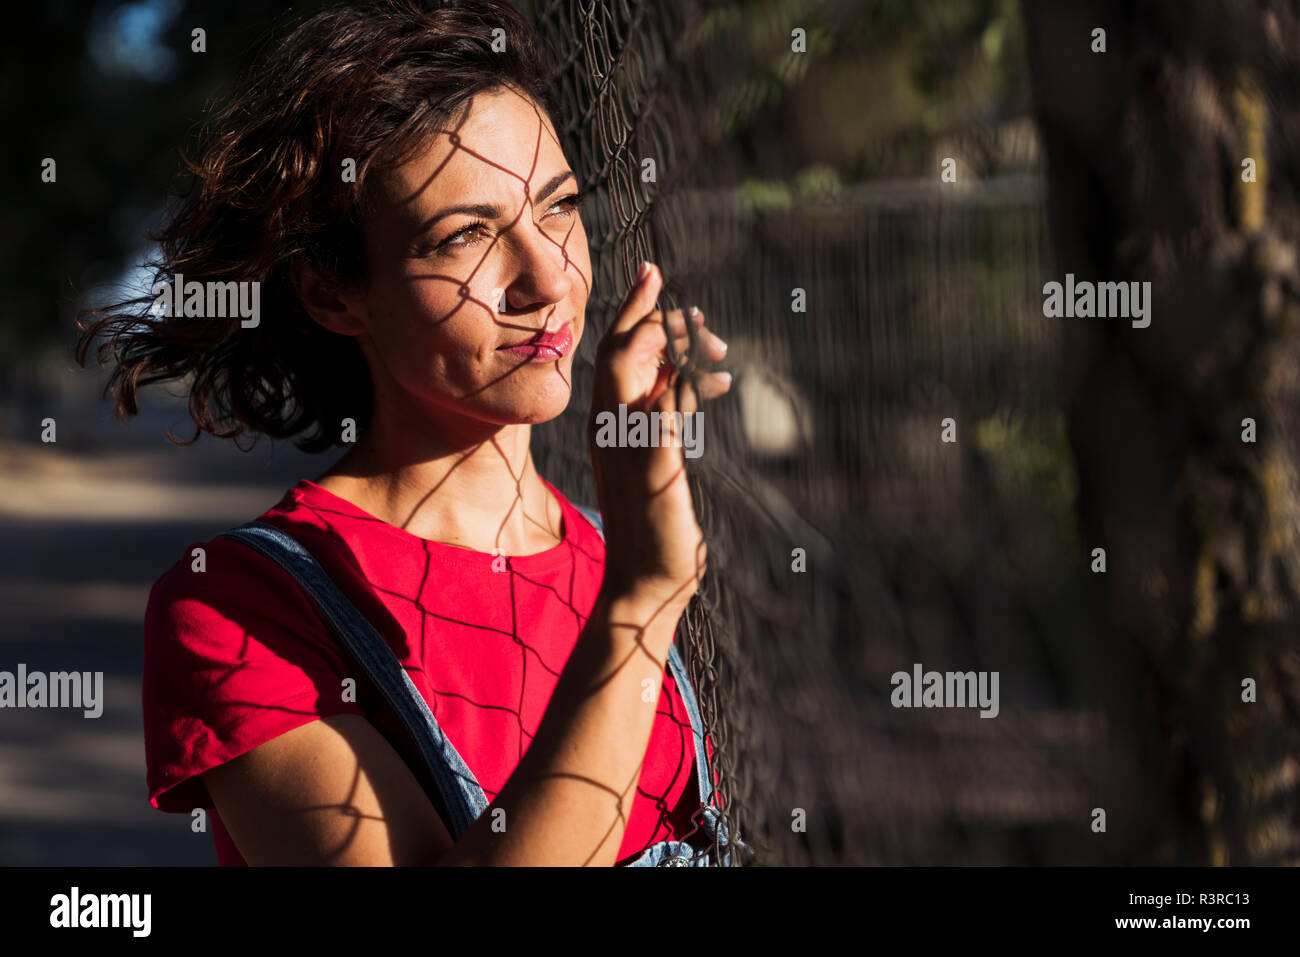 Portrait of smiling woman with shadow of wire mesh fence on her face looking at distance Stock Photo